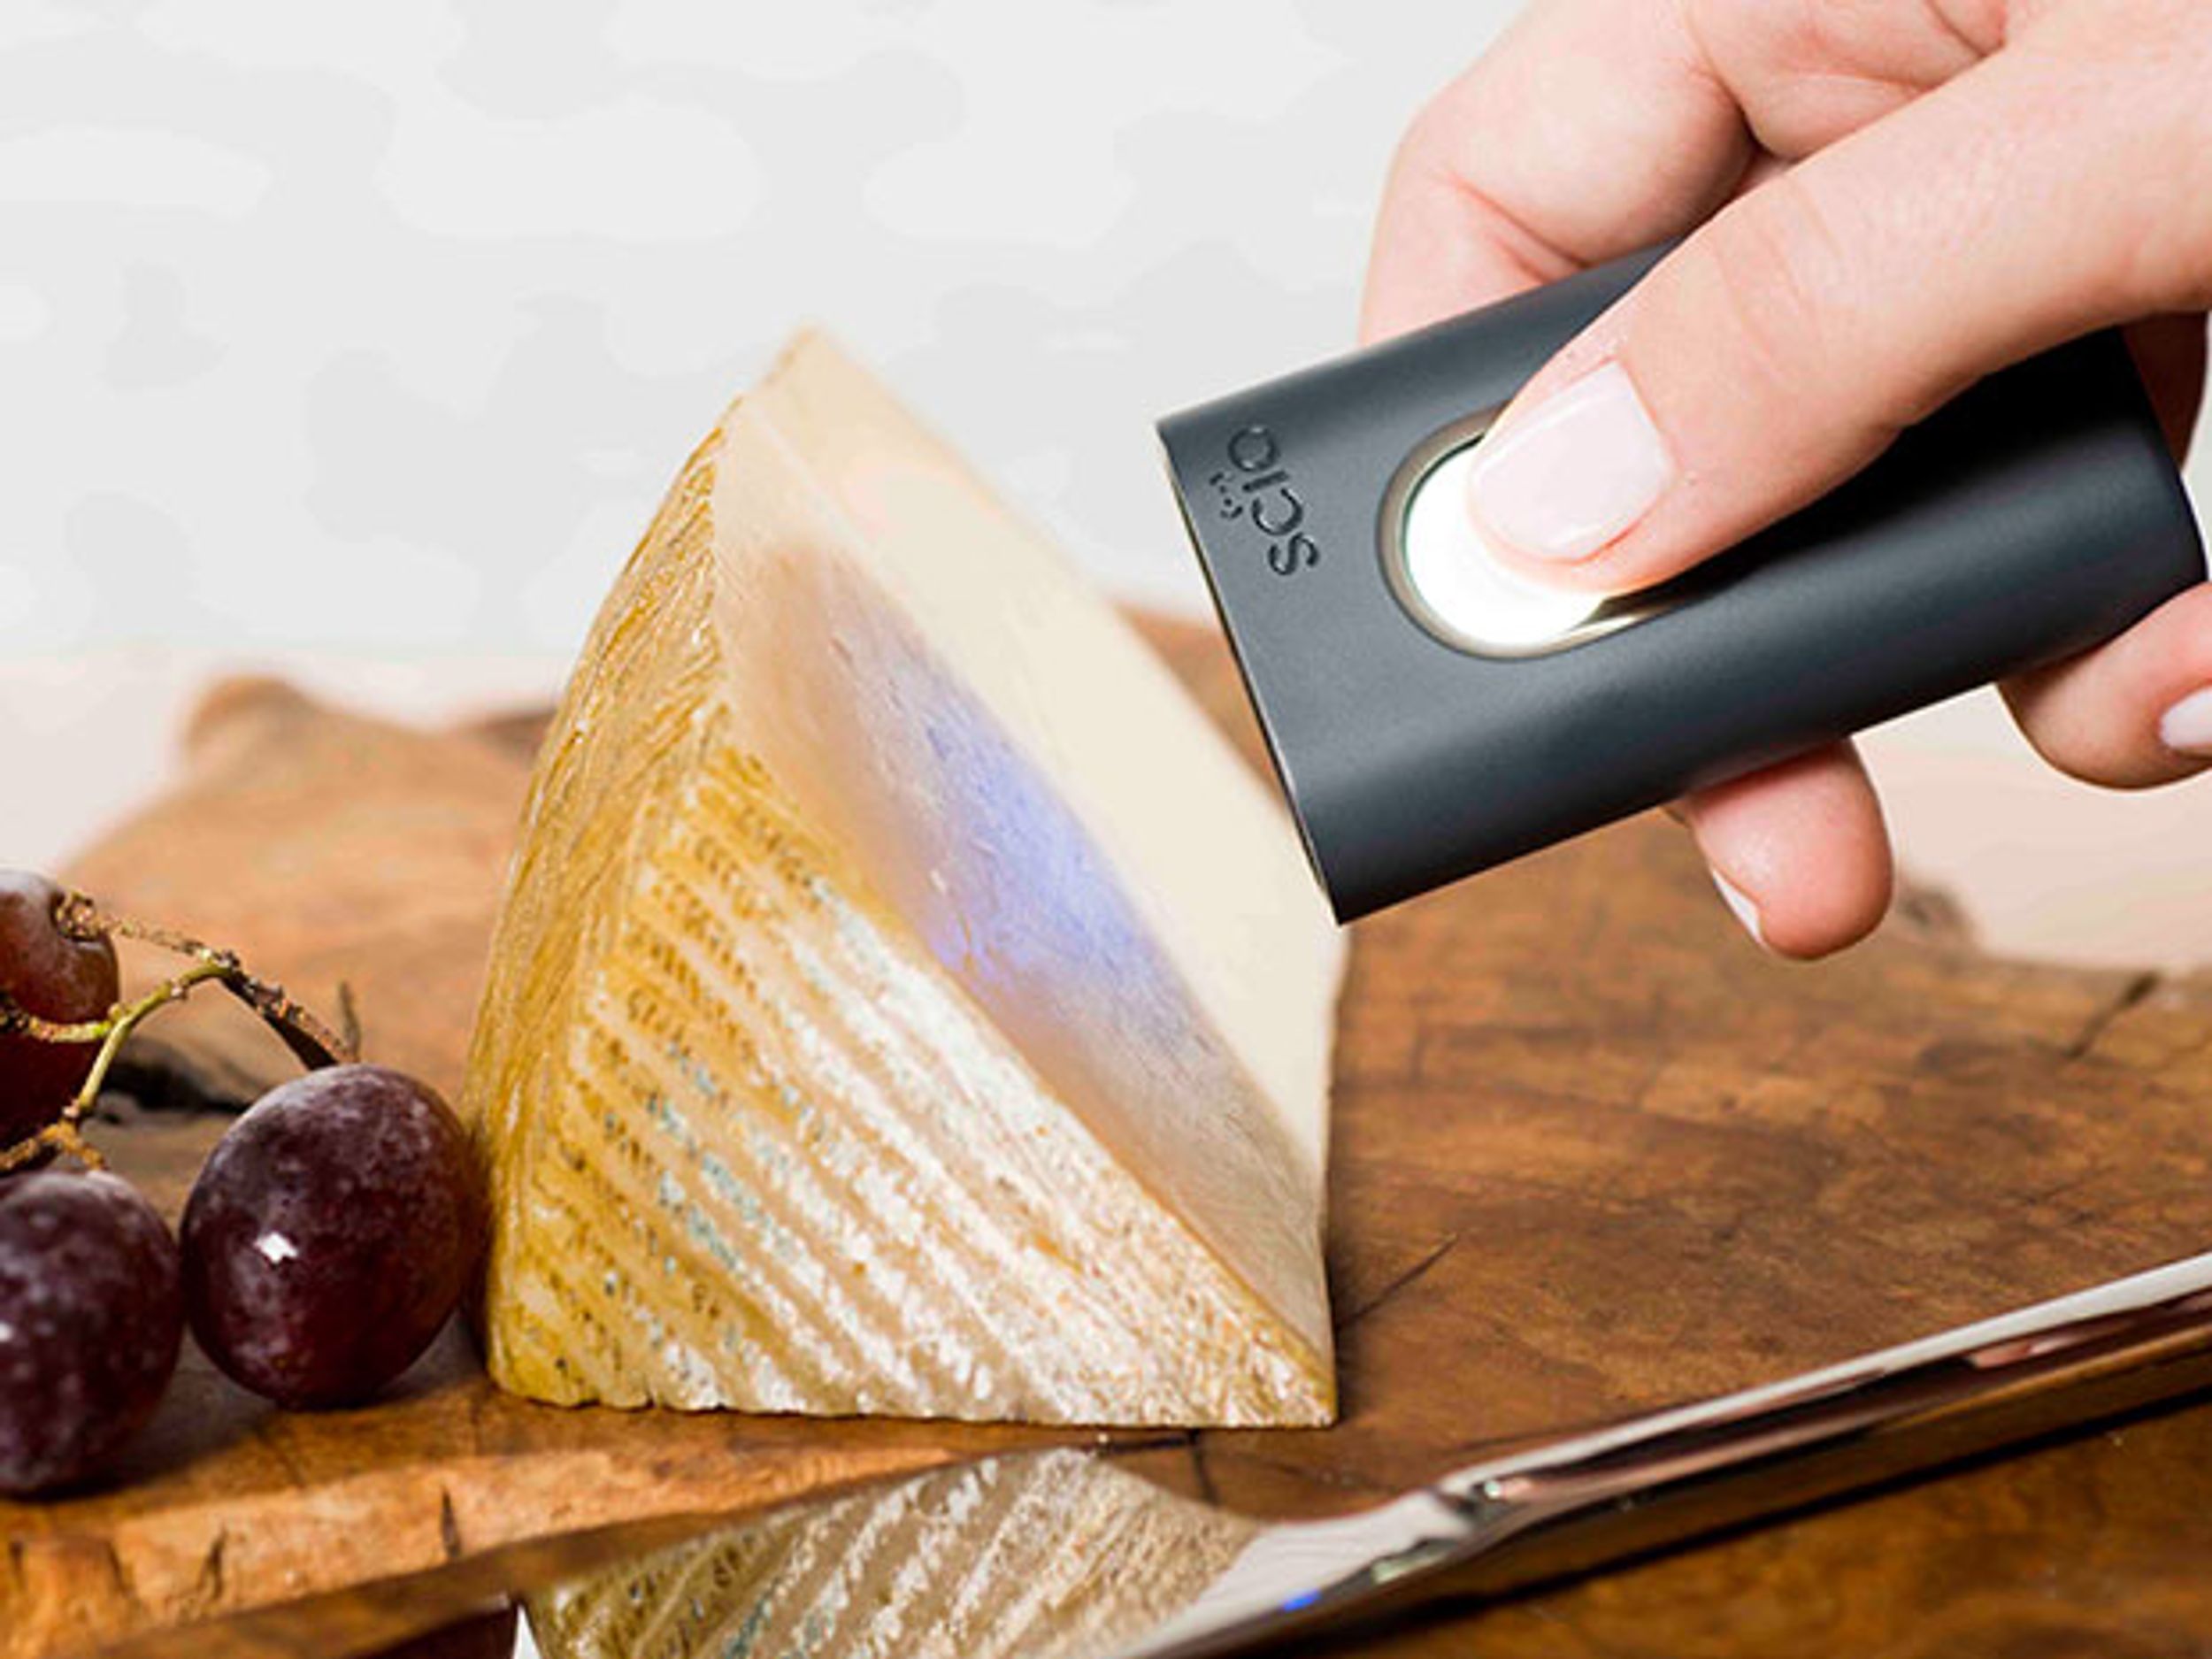 Photo shows a hand holding a tool called SCiO next to a piece of cheese